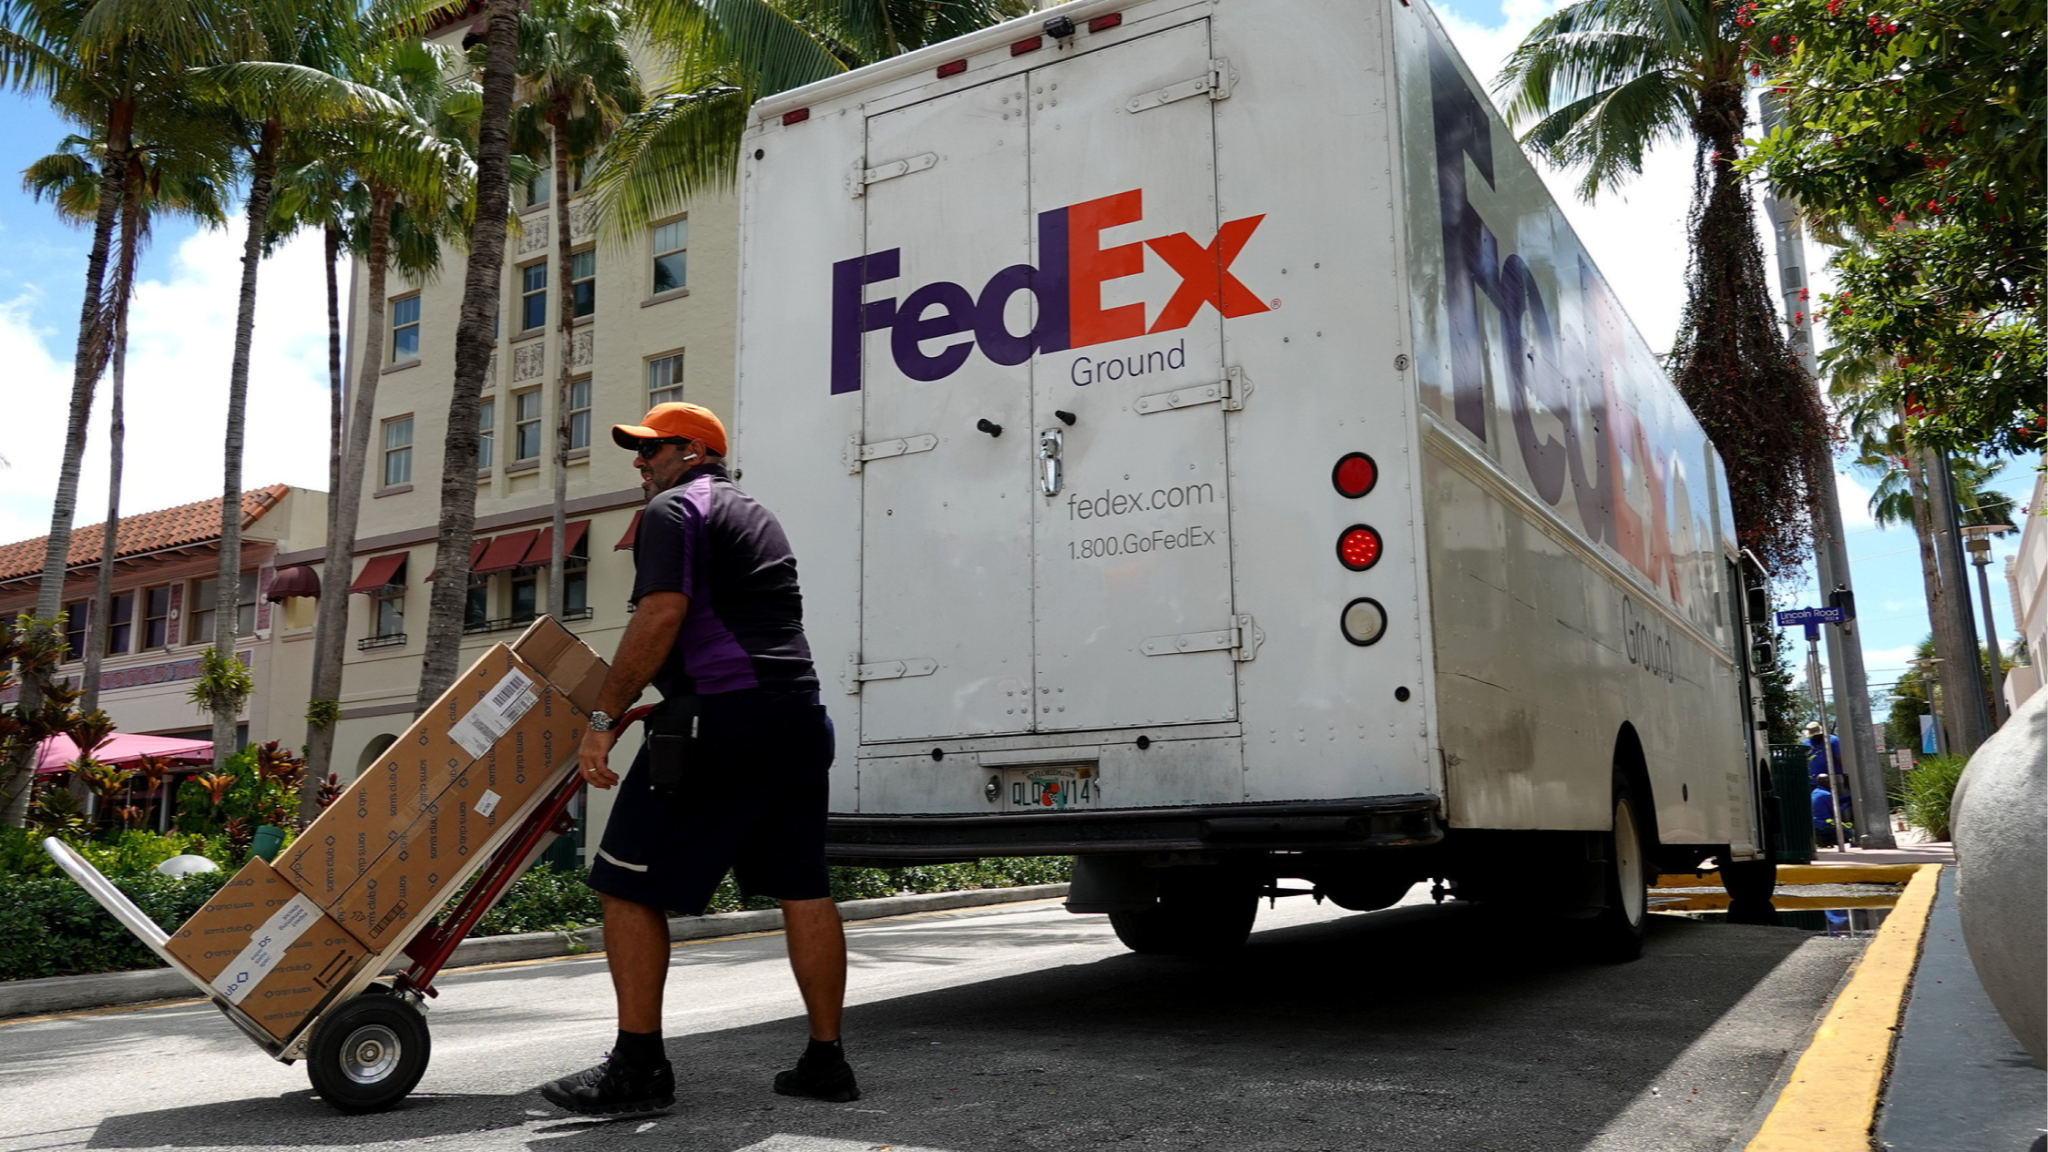 Wall St blames missteps at FedEx as parcel service fails to deliver